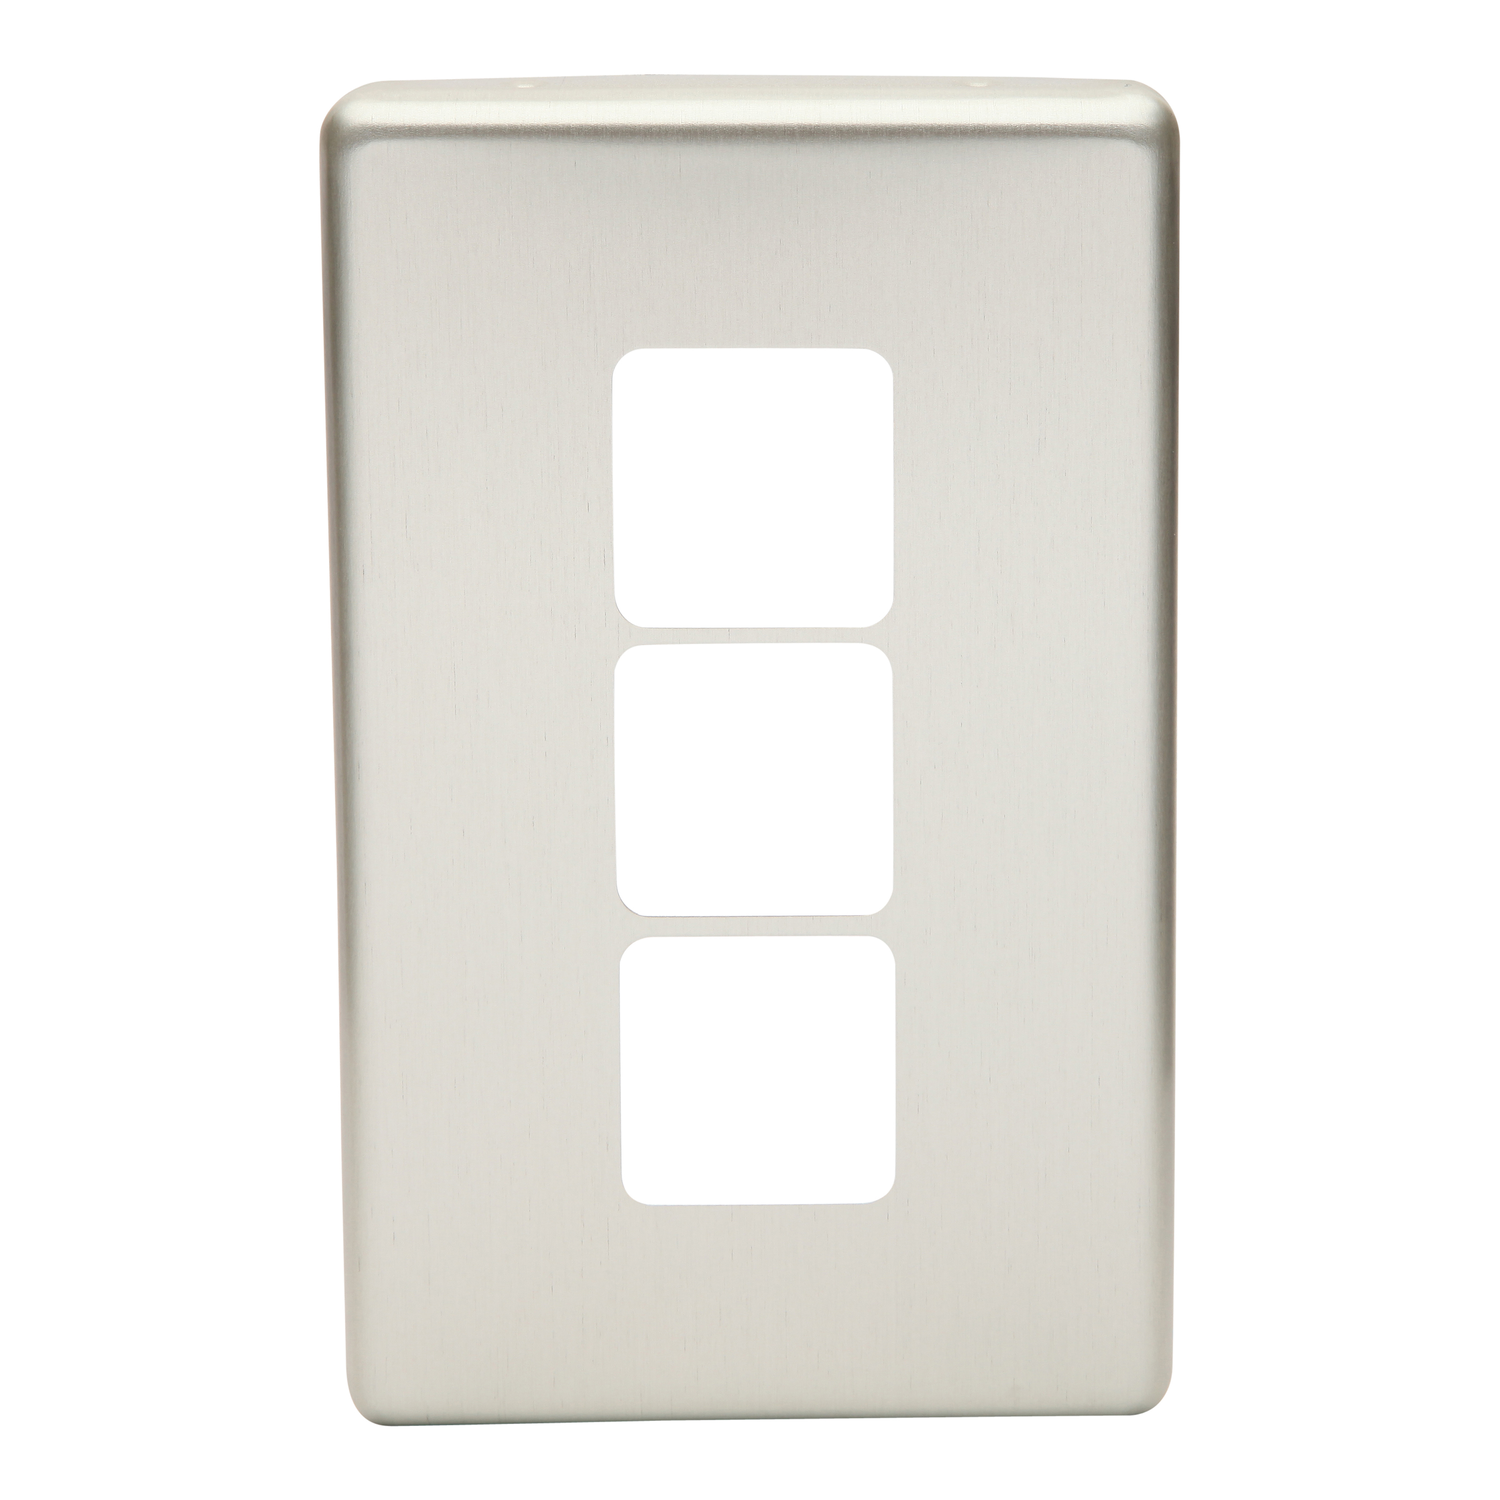 PDL 600 Series - Cover Plate Switch 3-Gang - Stainless steel